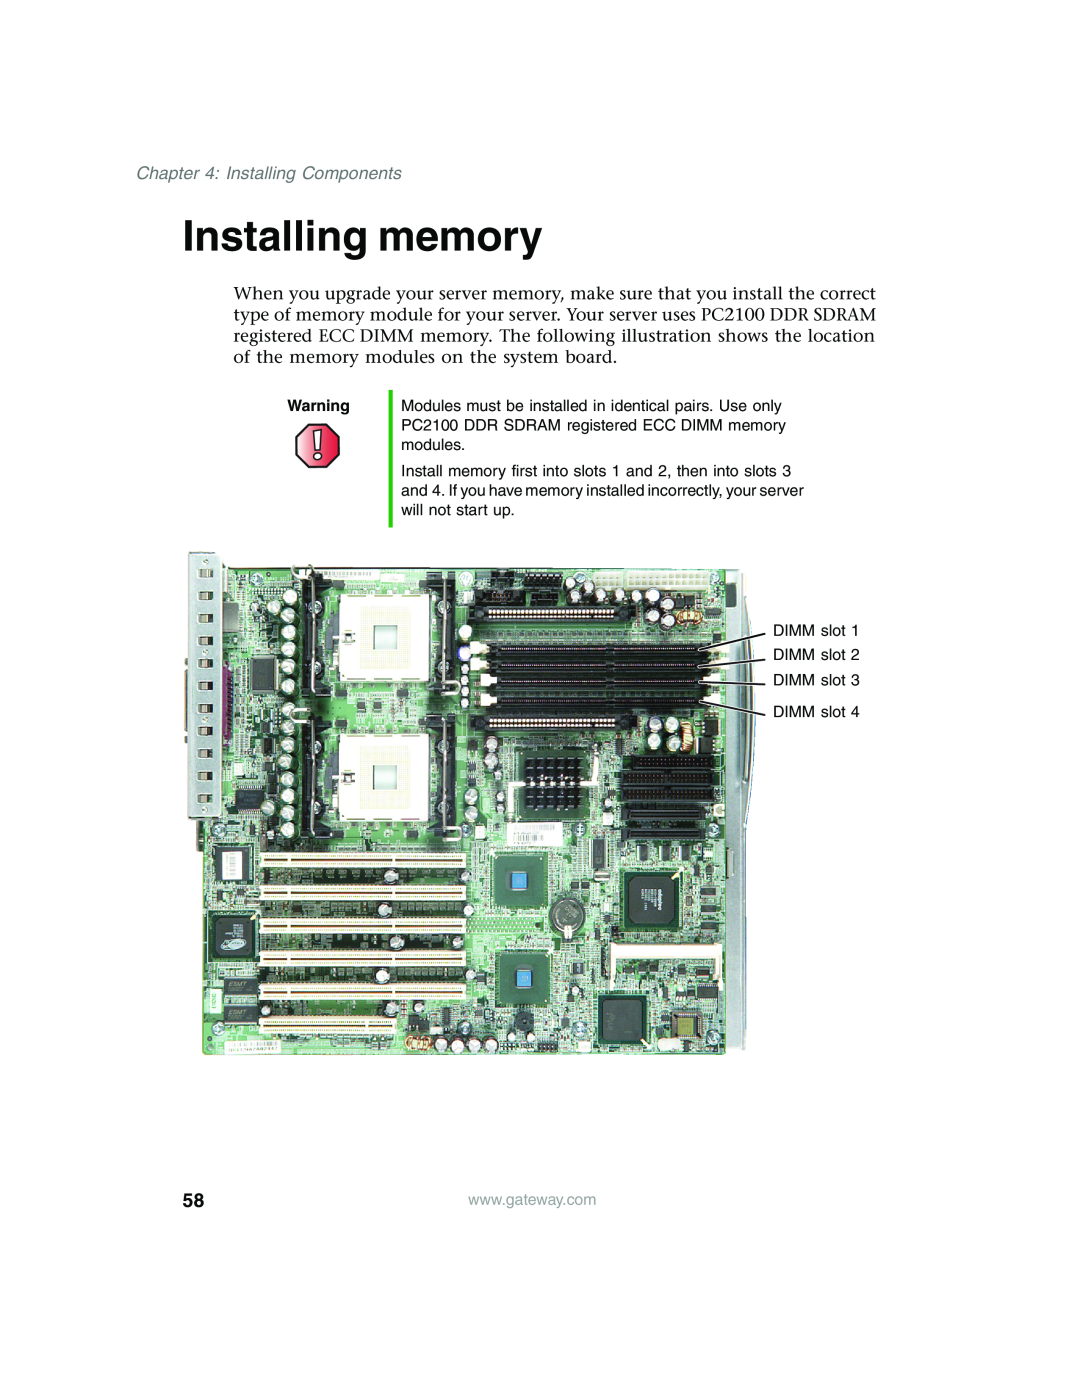 Gateway 960 manual Installing memory, Installing Components 